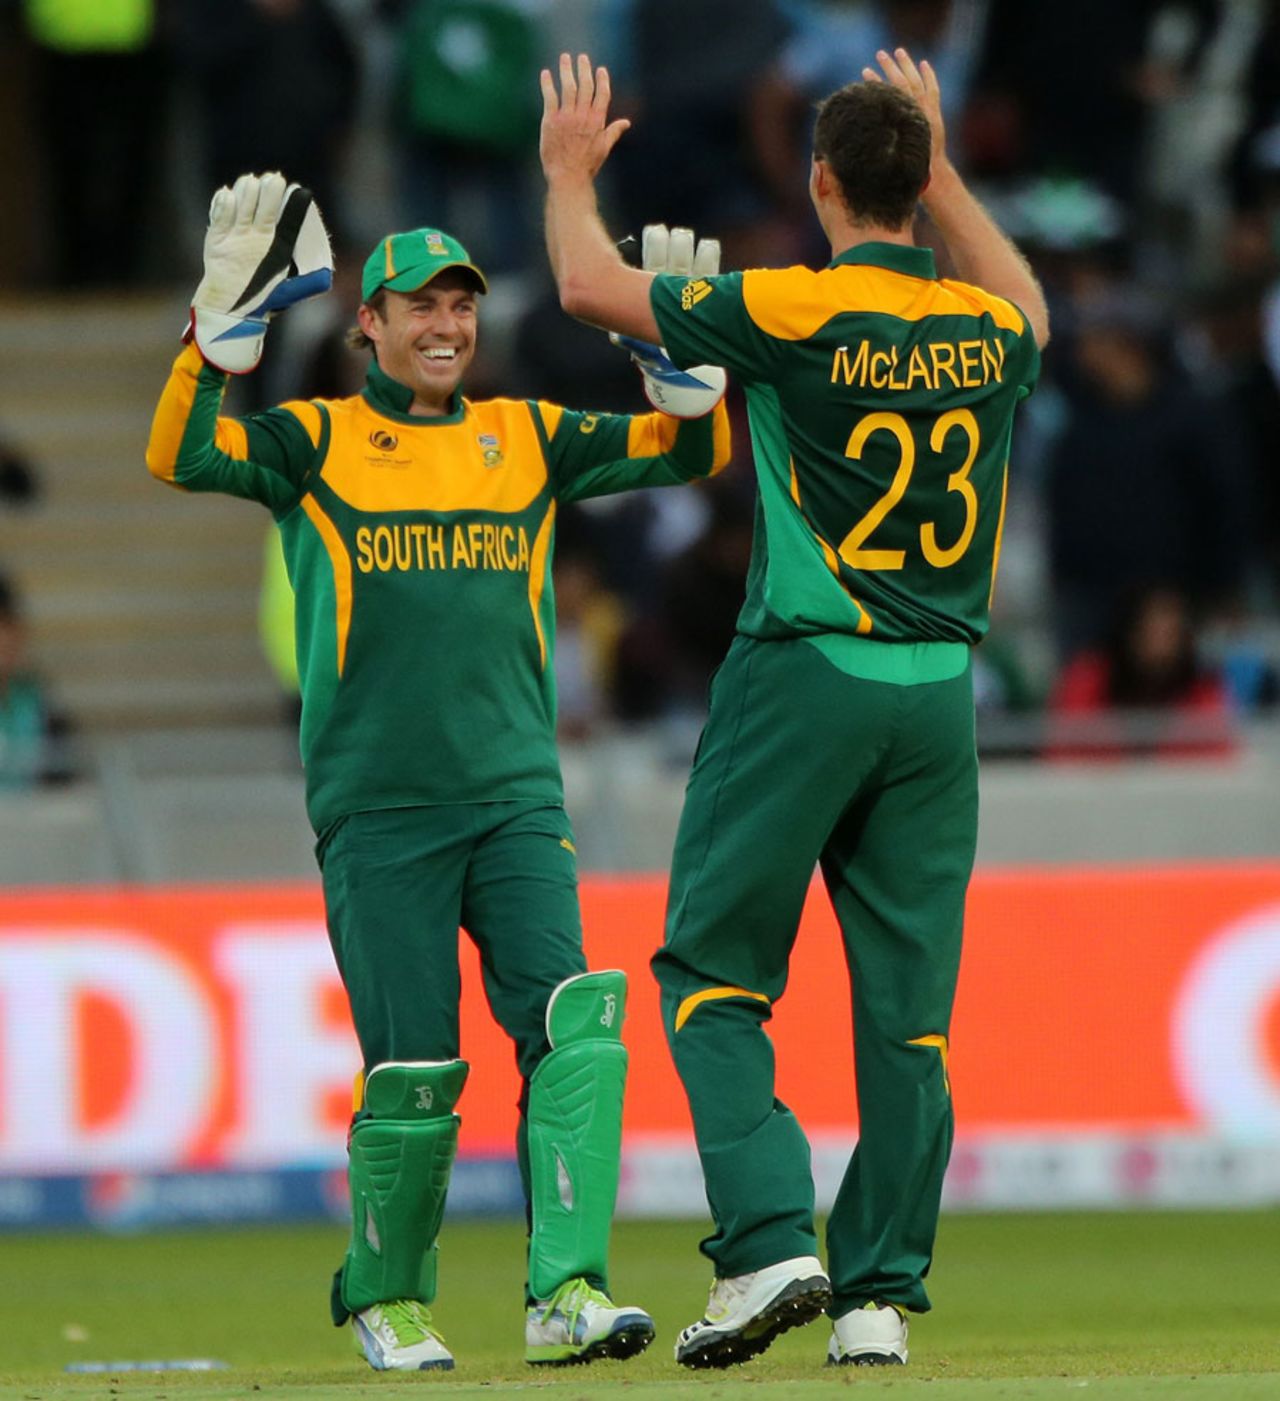 Ryan McLaren ended with four wickets, Pakistan v South Africa, Champions Trophy, Group B, Edgbaston, June 10, 2013